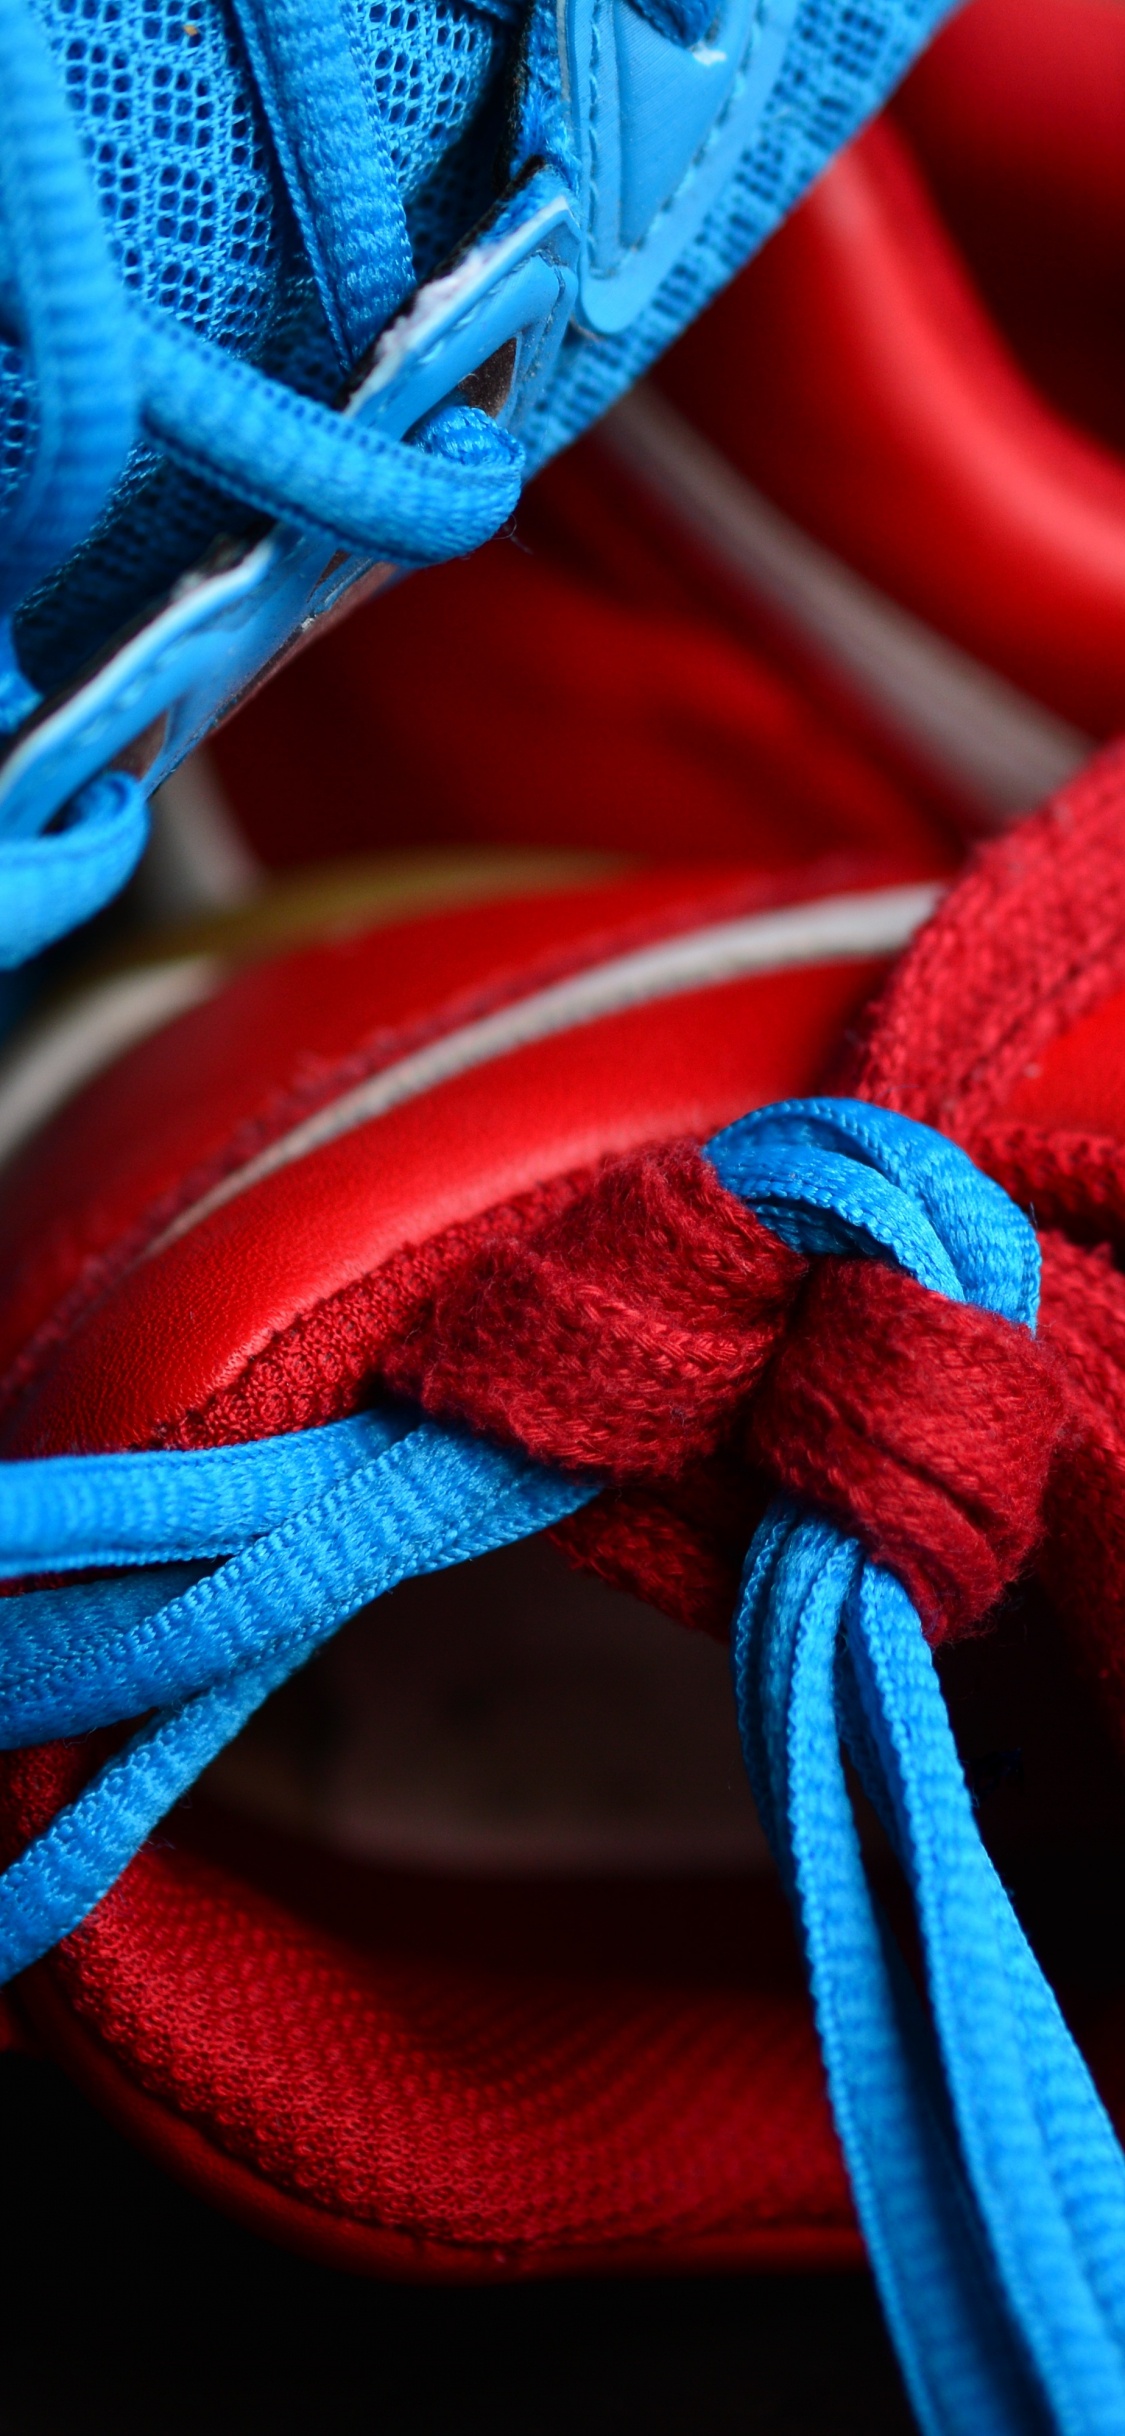 Red and Blue Lace up Shoes. Wallpaper in 1125x2436 Resolution